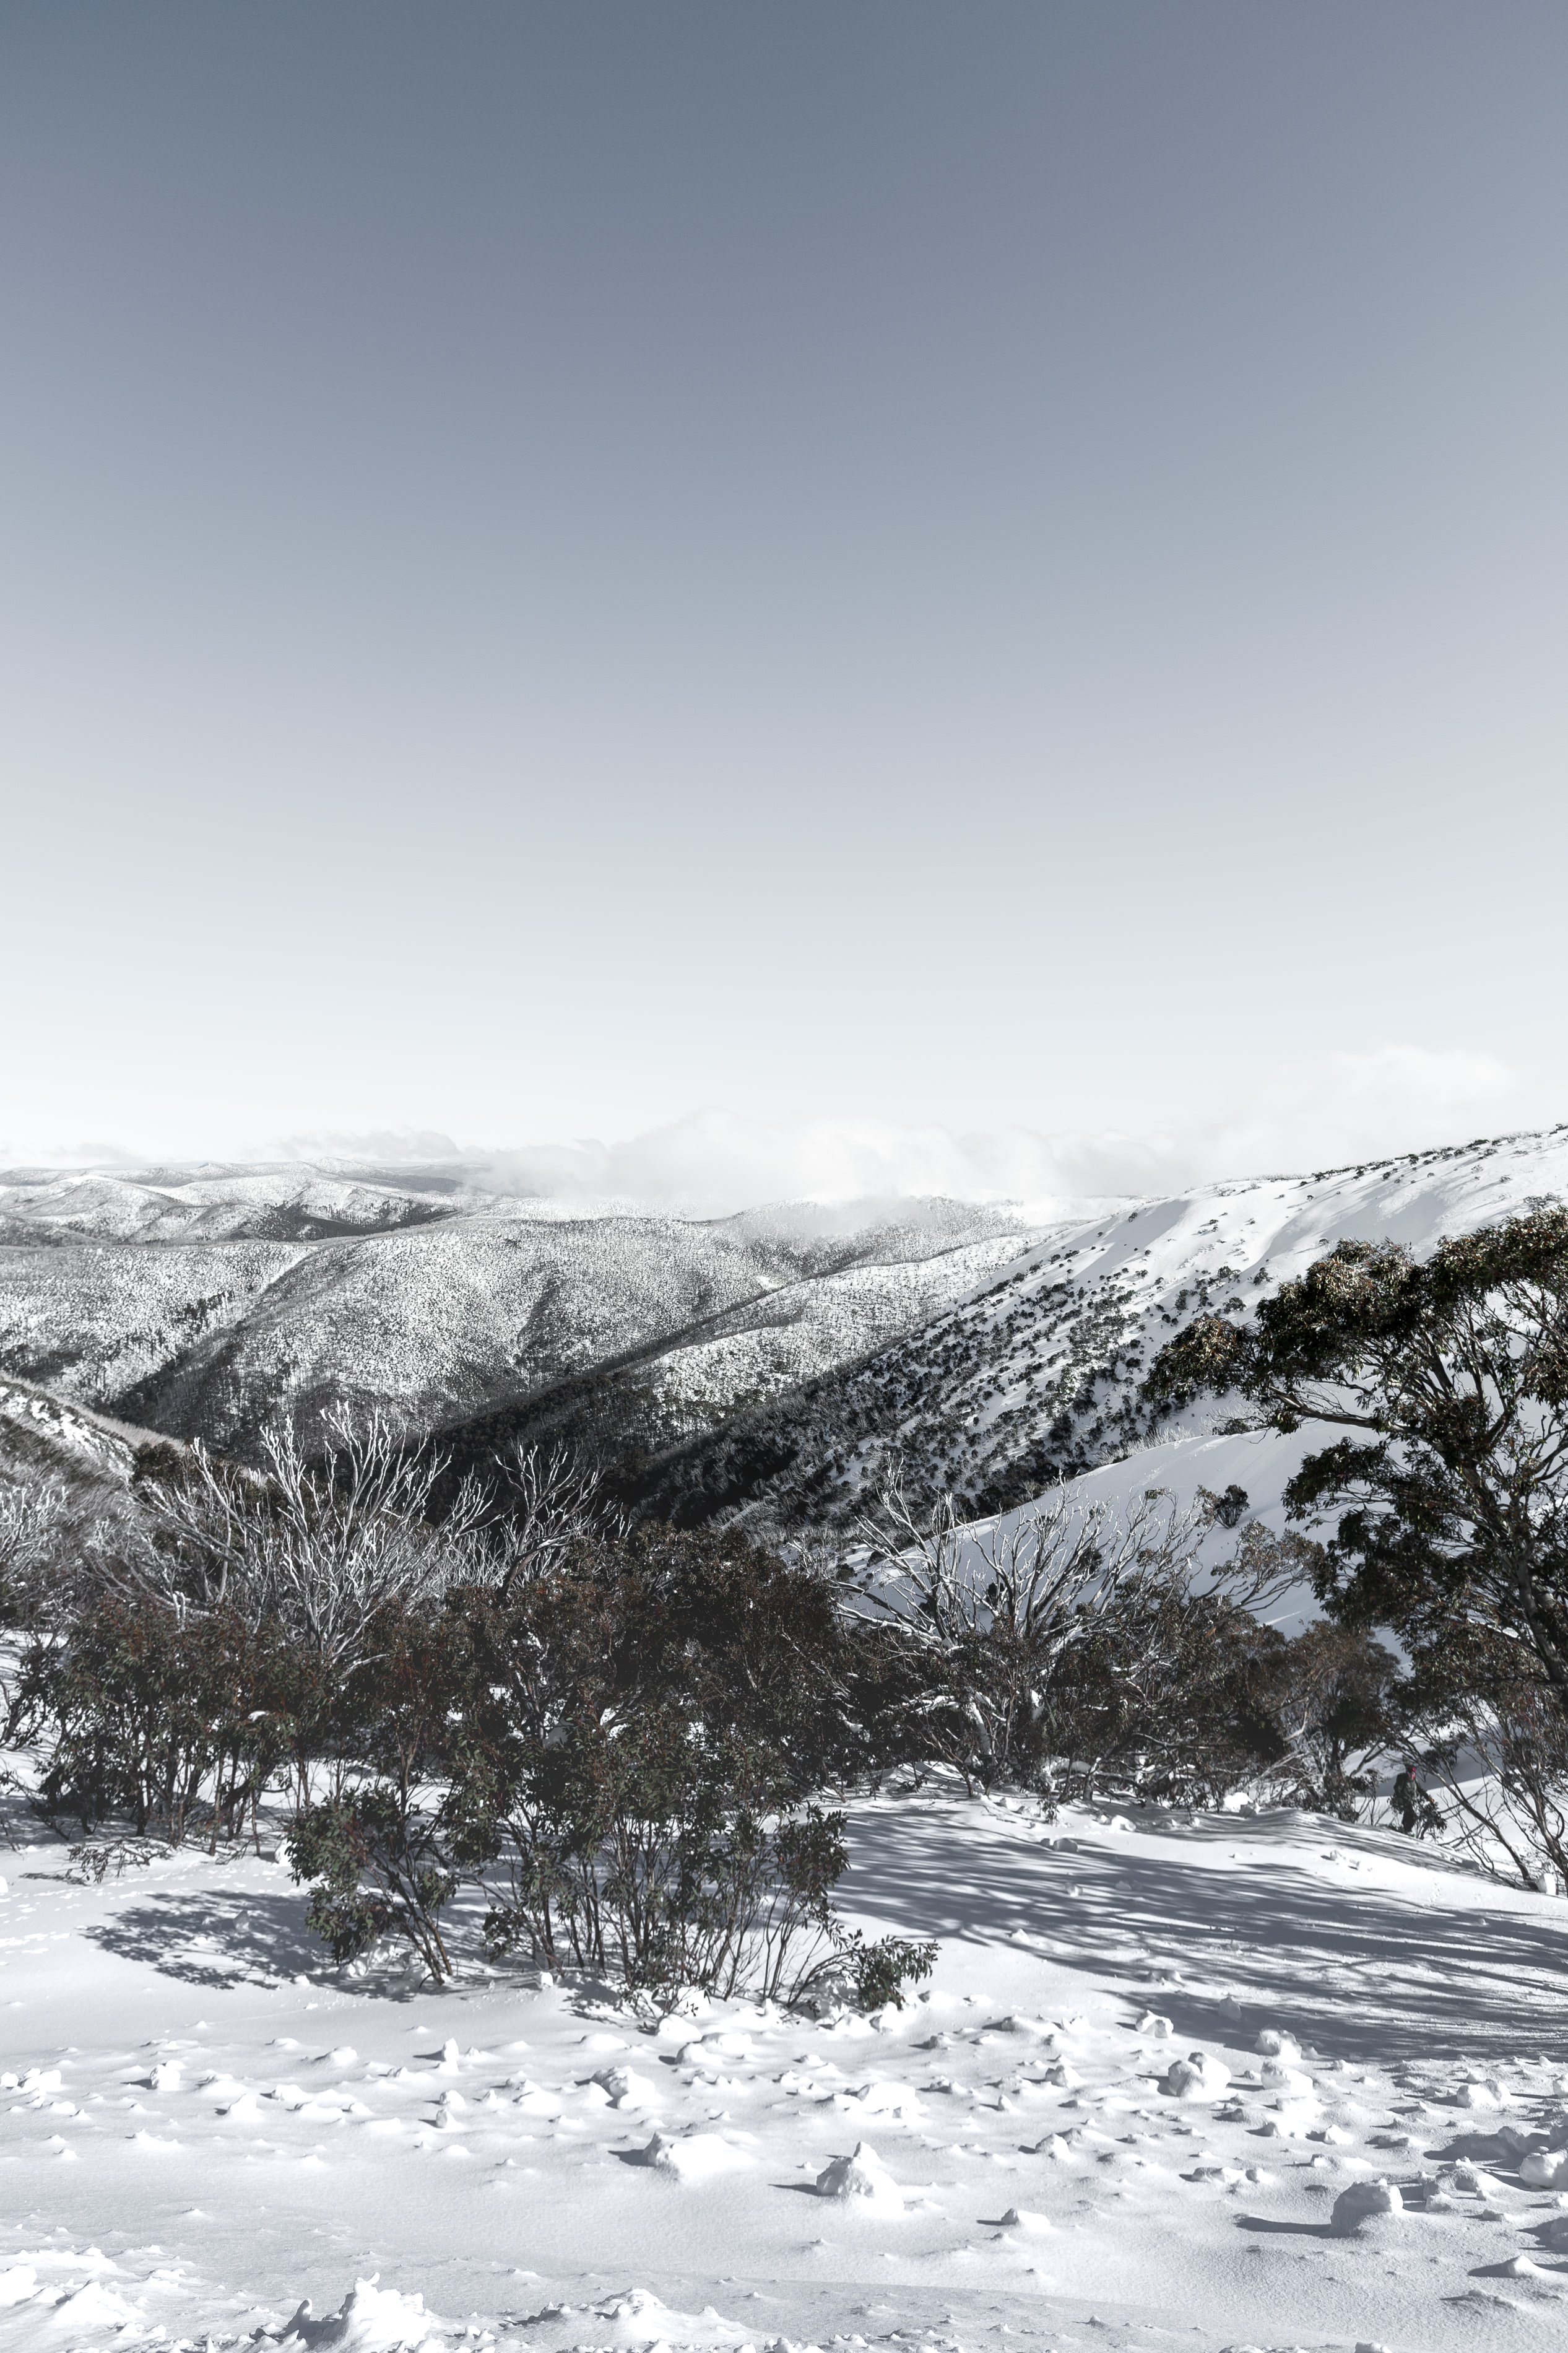 Travel photography of Mt Hotham's Snowy Peaks